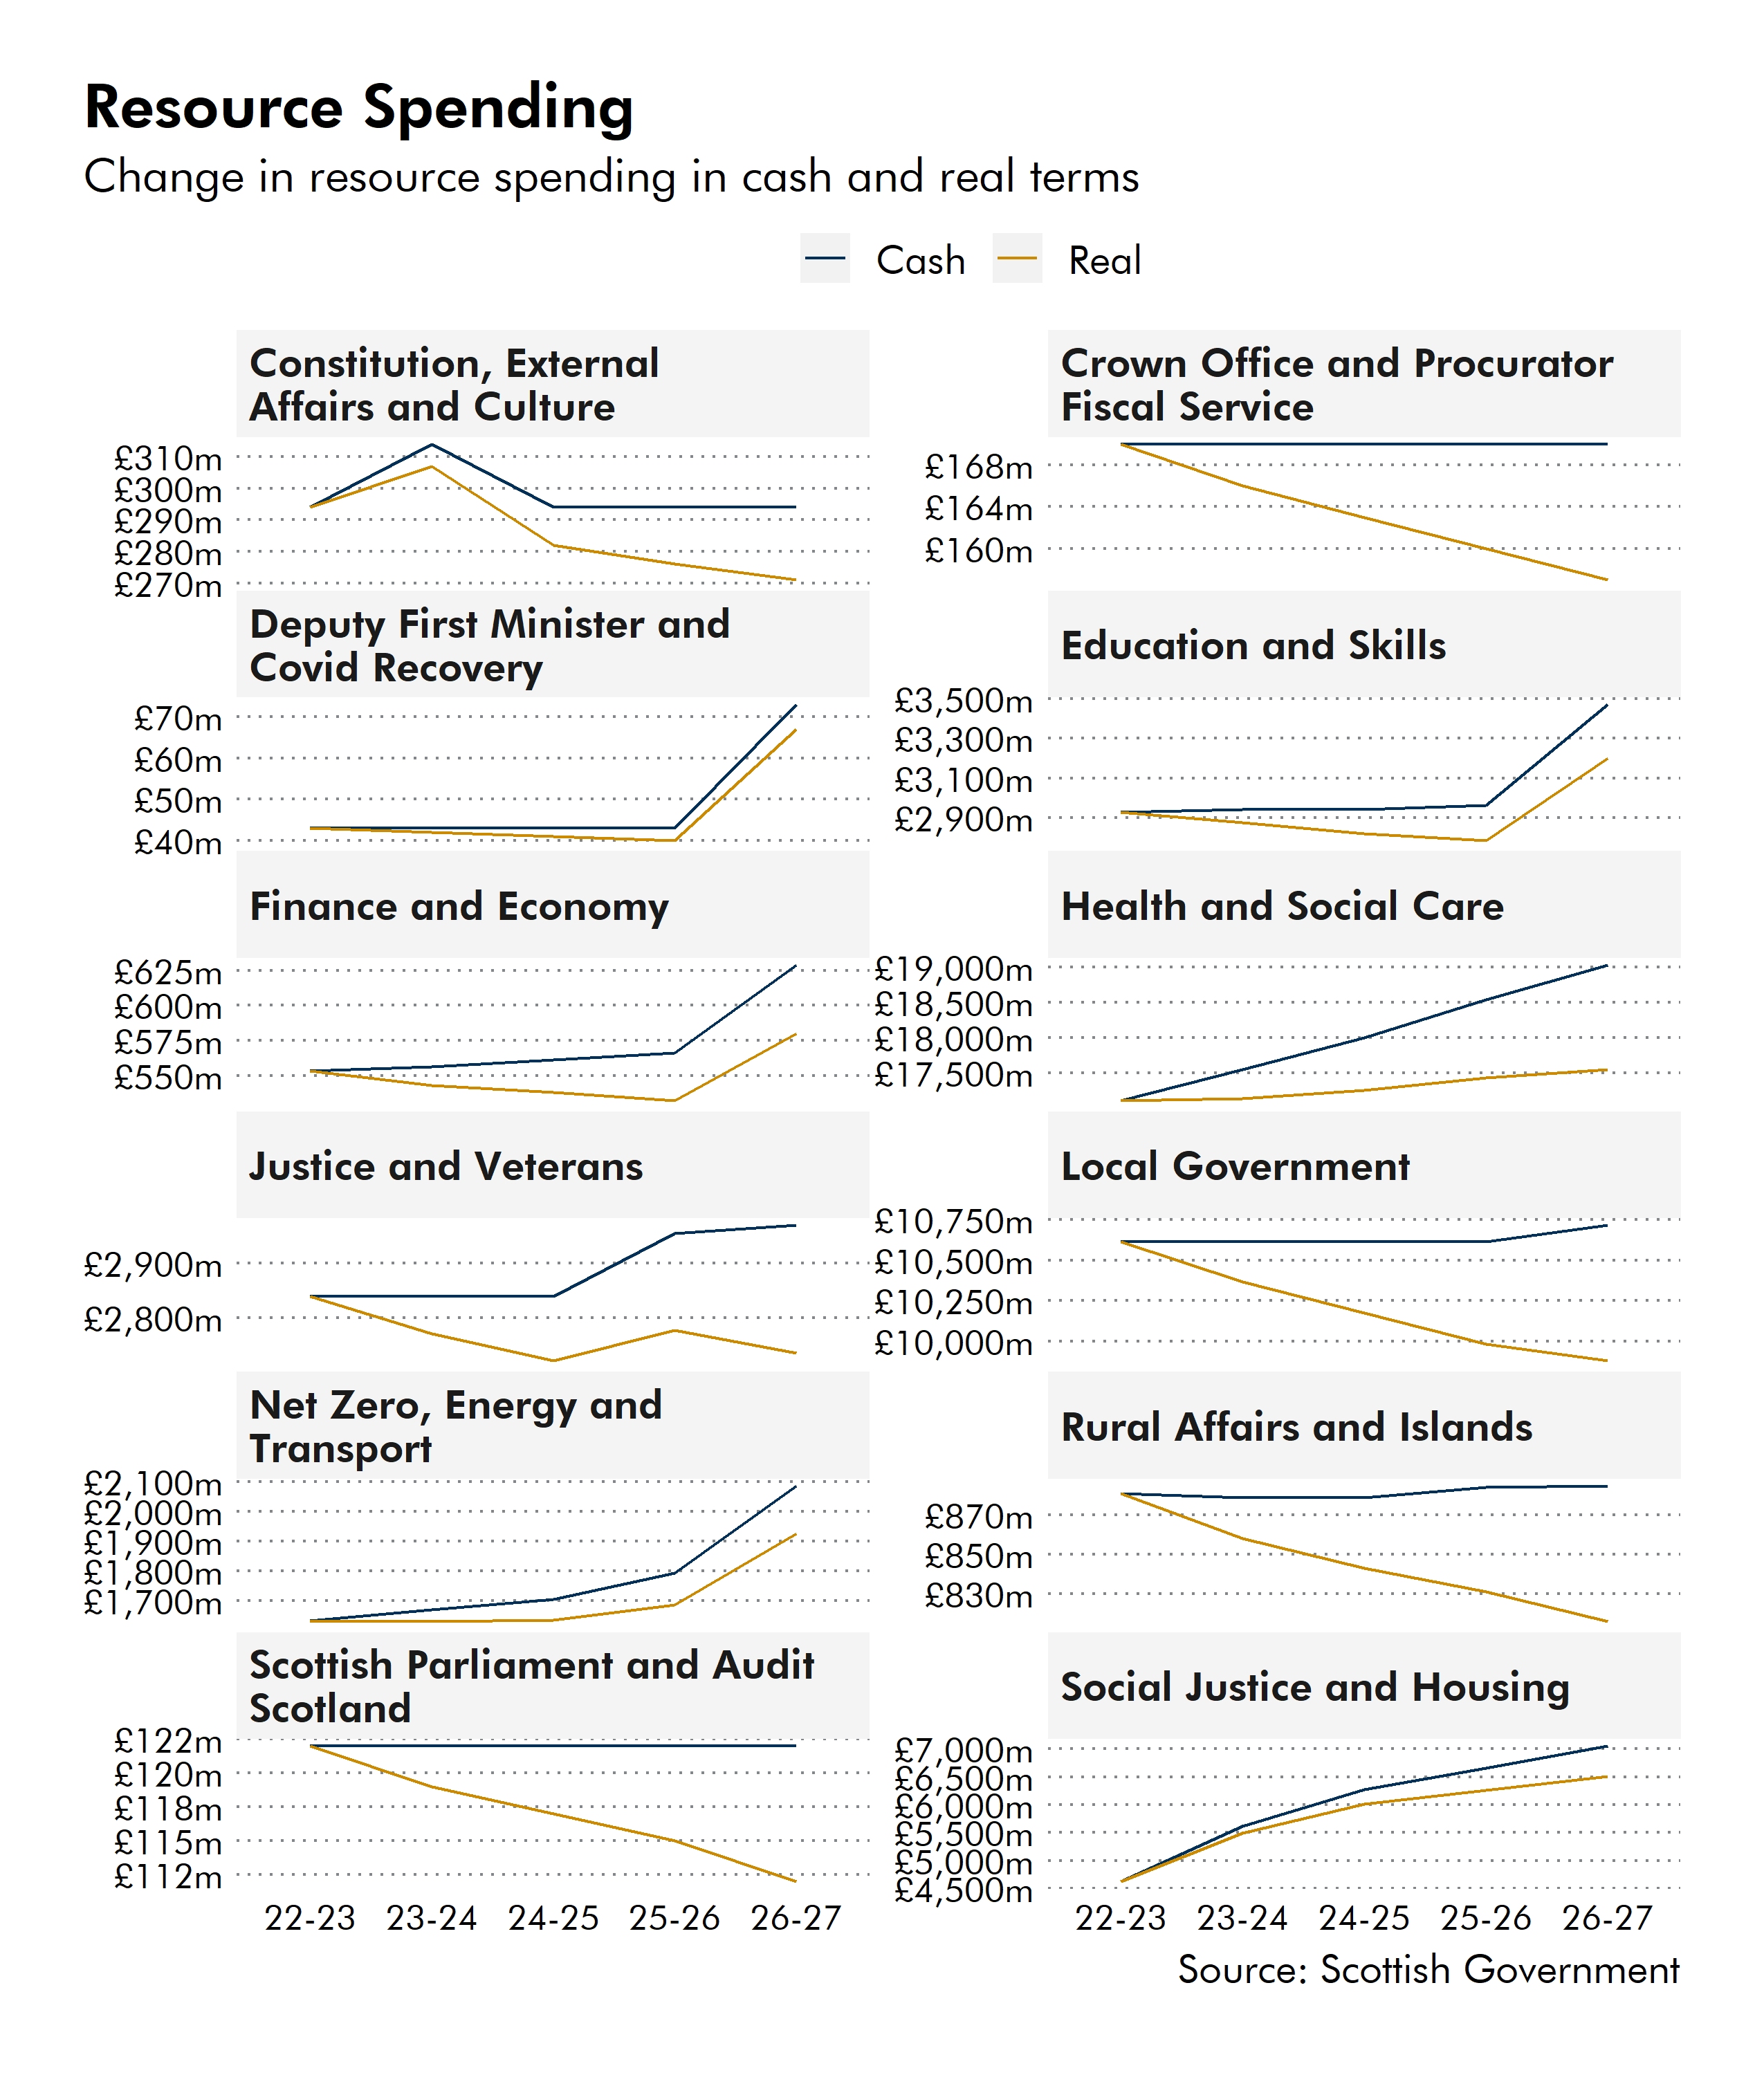 Twelve line graphs showing how the budget for each portfolio will change in cash and real terms between 2022-23 and 2026-27.